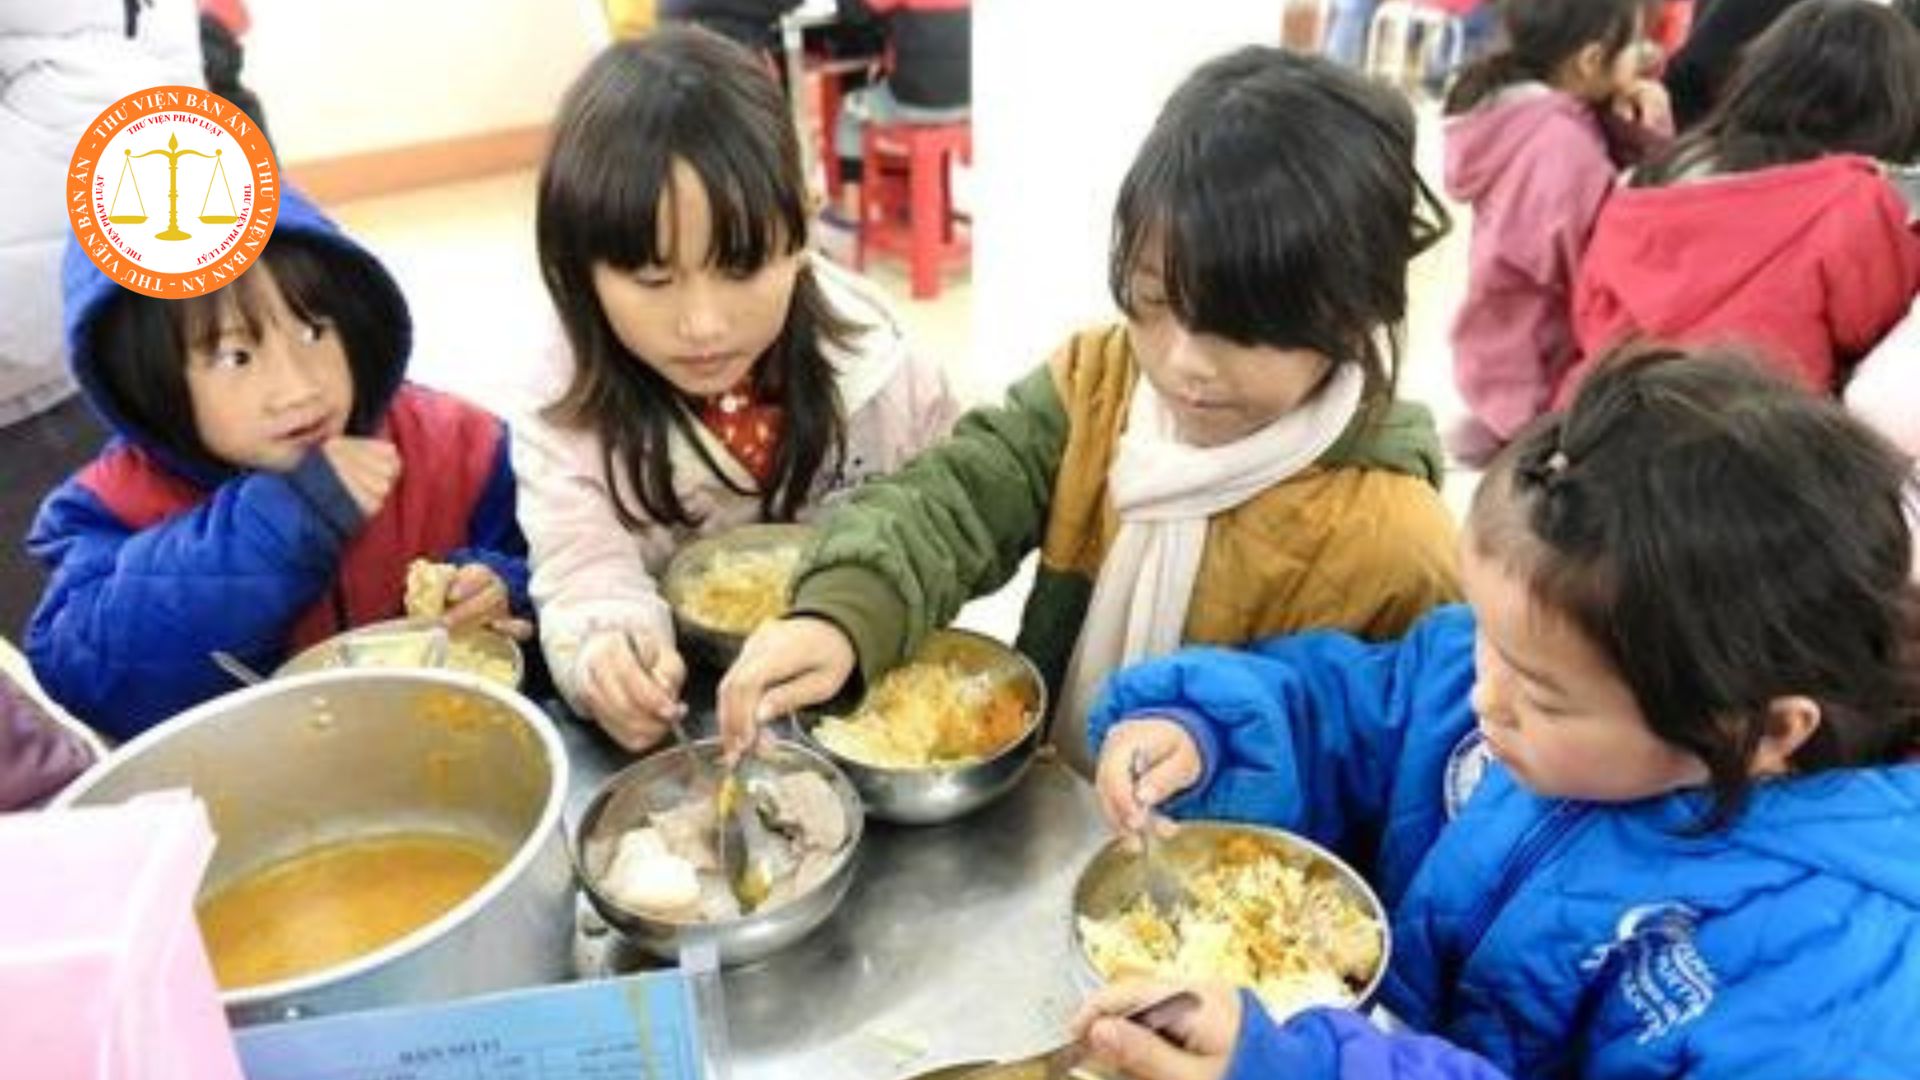 The Prime Minister's request on reviewing the organization of meals for students in mountainous areas in Vietnam - To Strictly handle violations